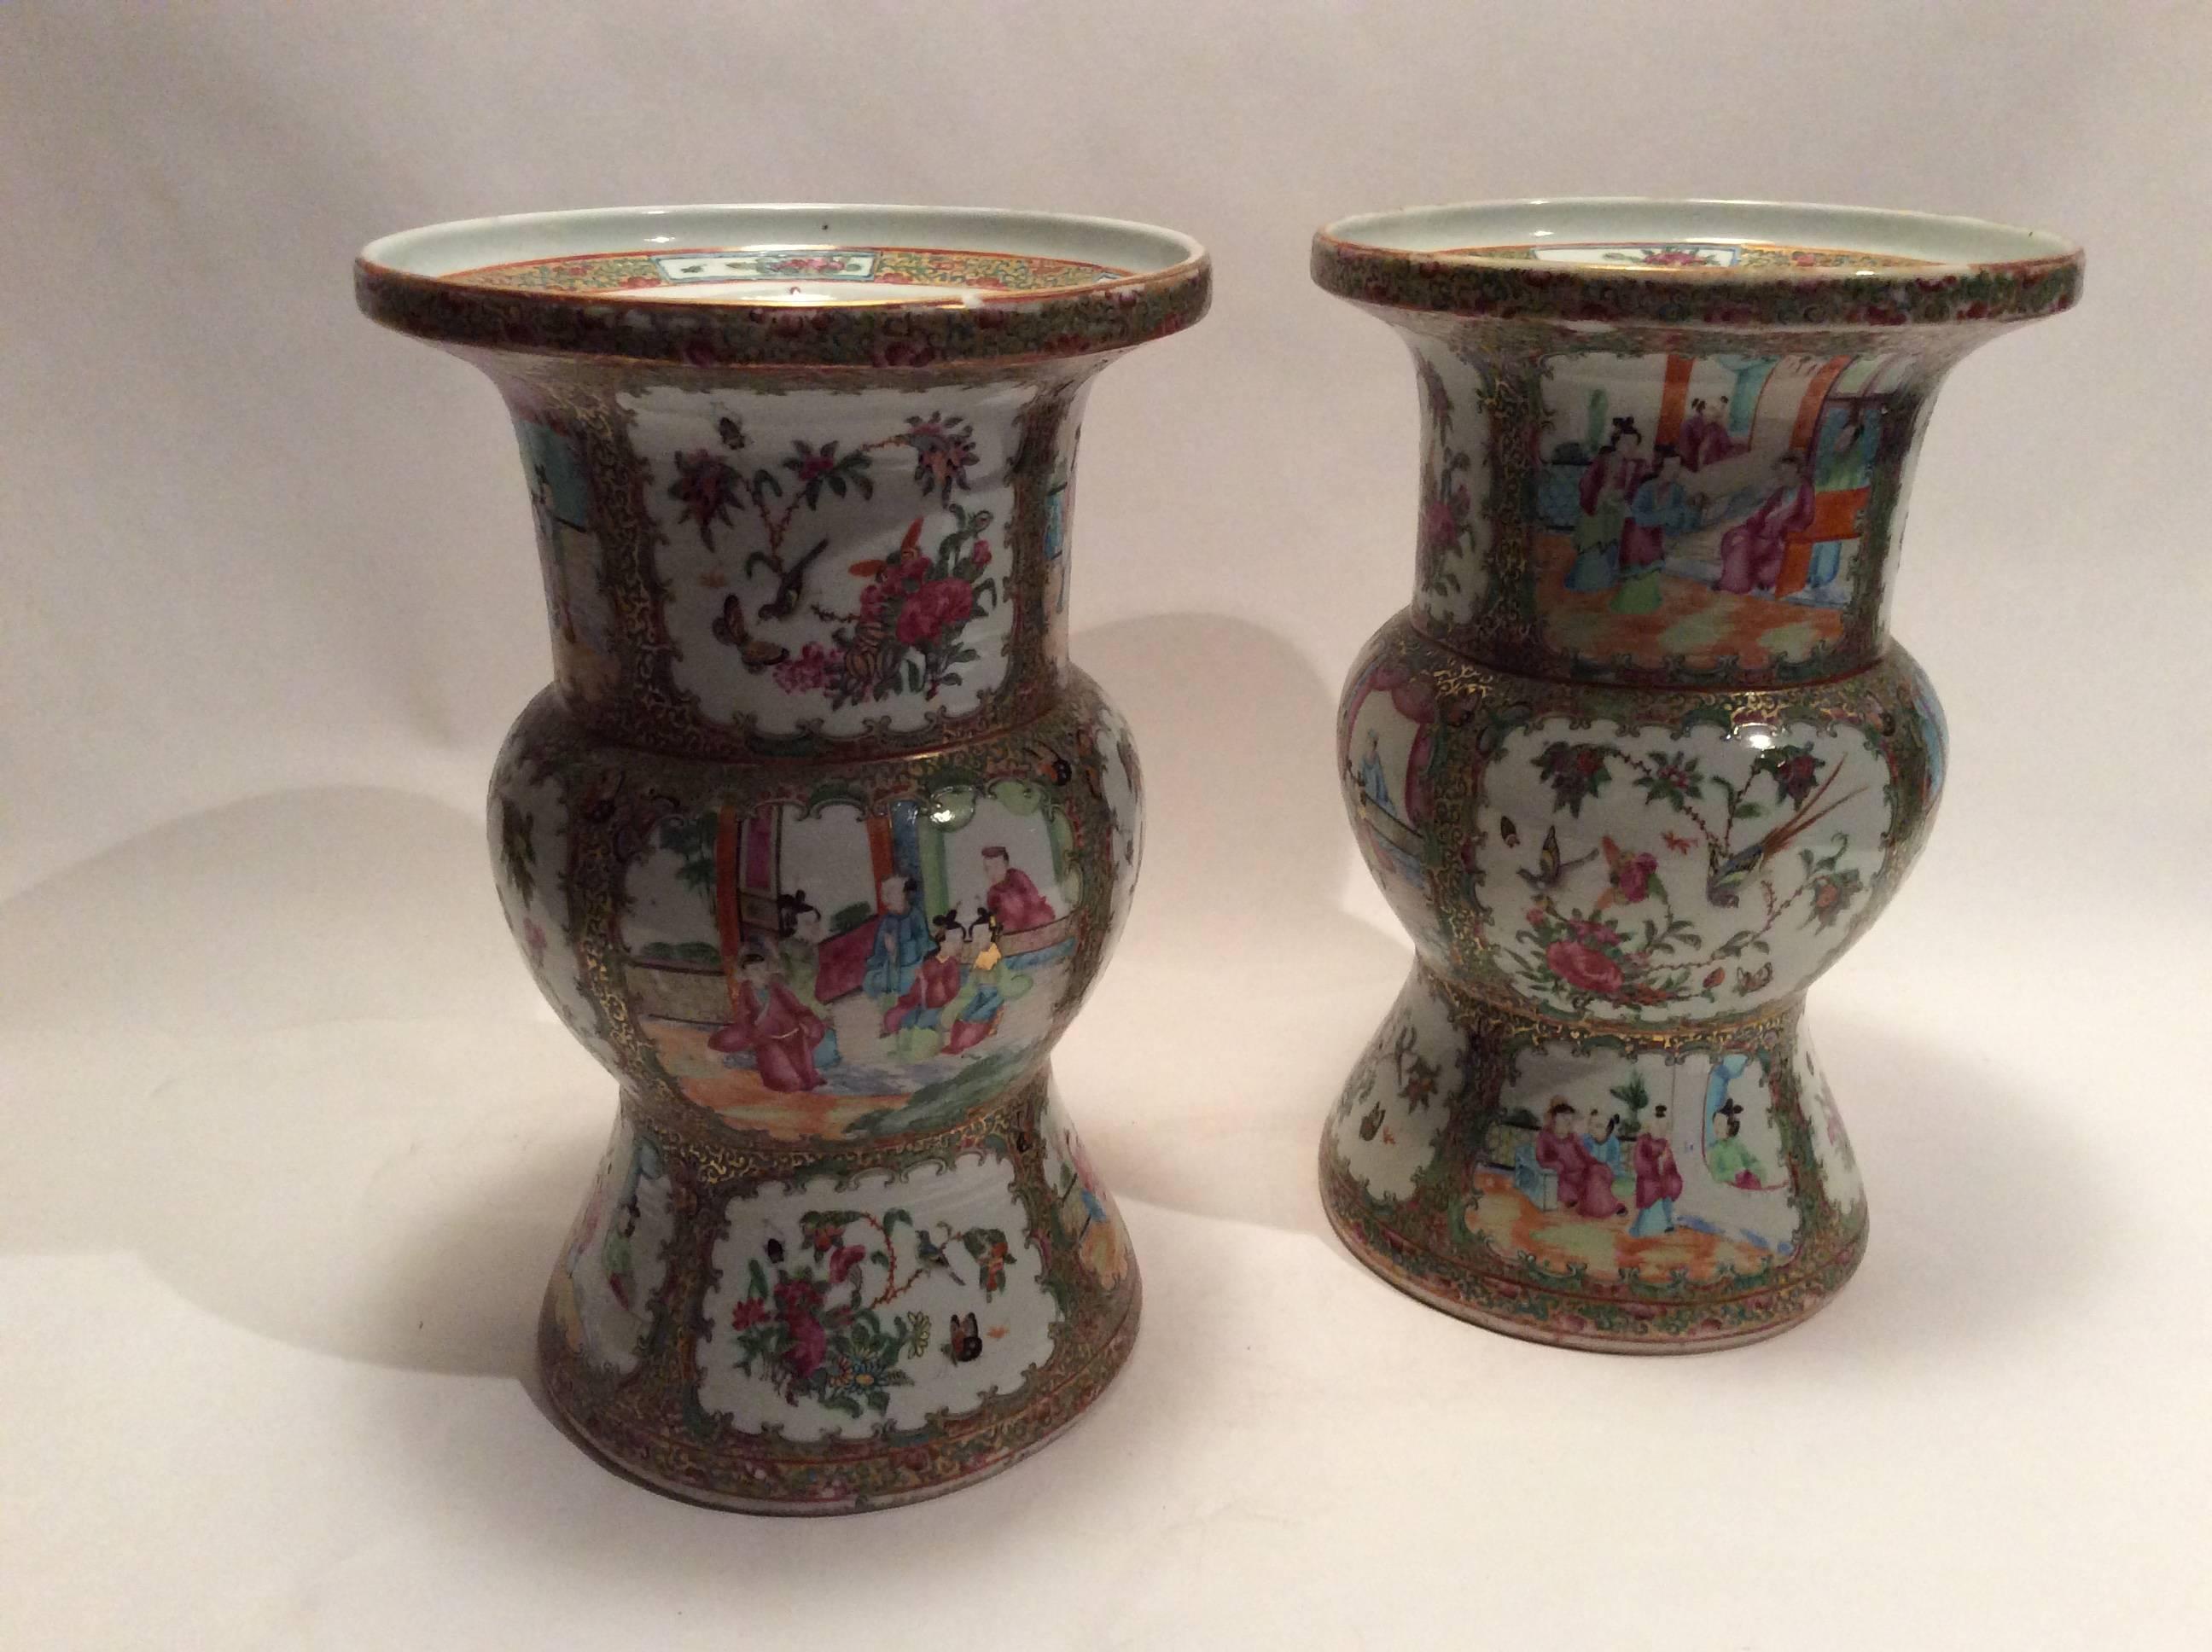 Cylindrical vases with flared rims, these pair have been in one family for over a hundred years. Features cartouches surrounded by scrolling green and gold borders.
Alternating scenes of nature and indoor scenes depicting people in conversation.